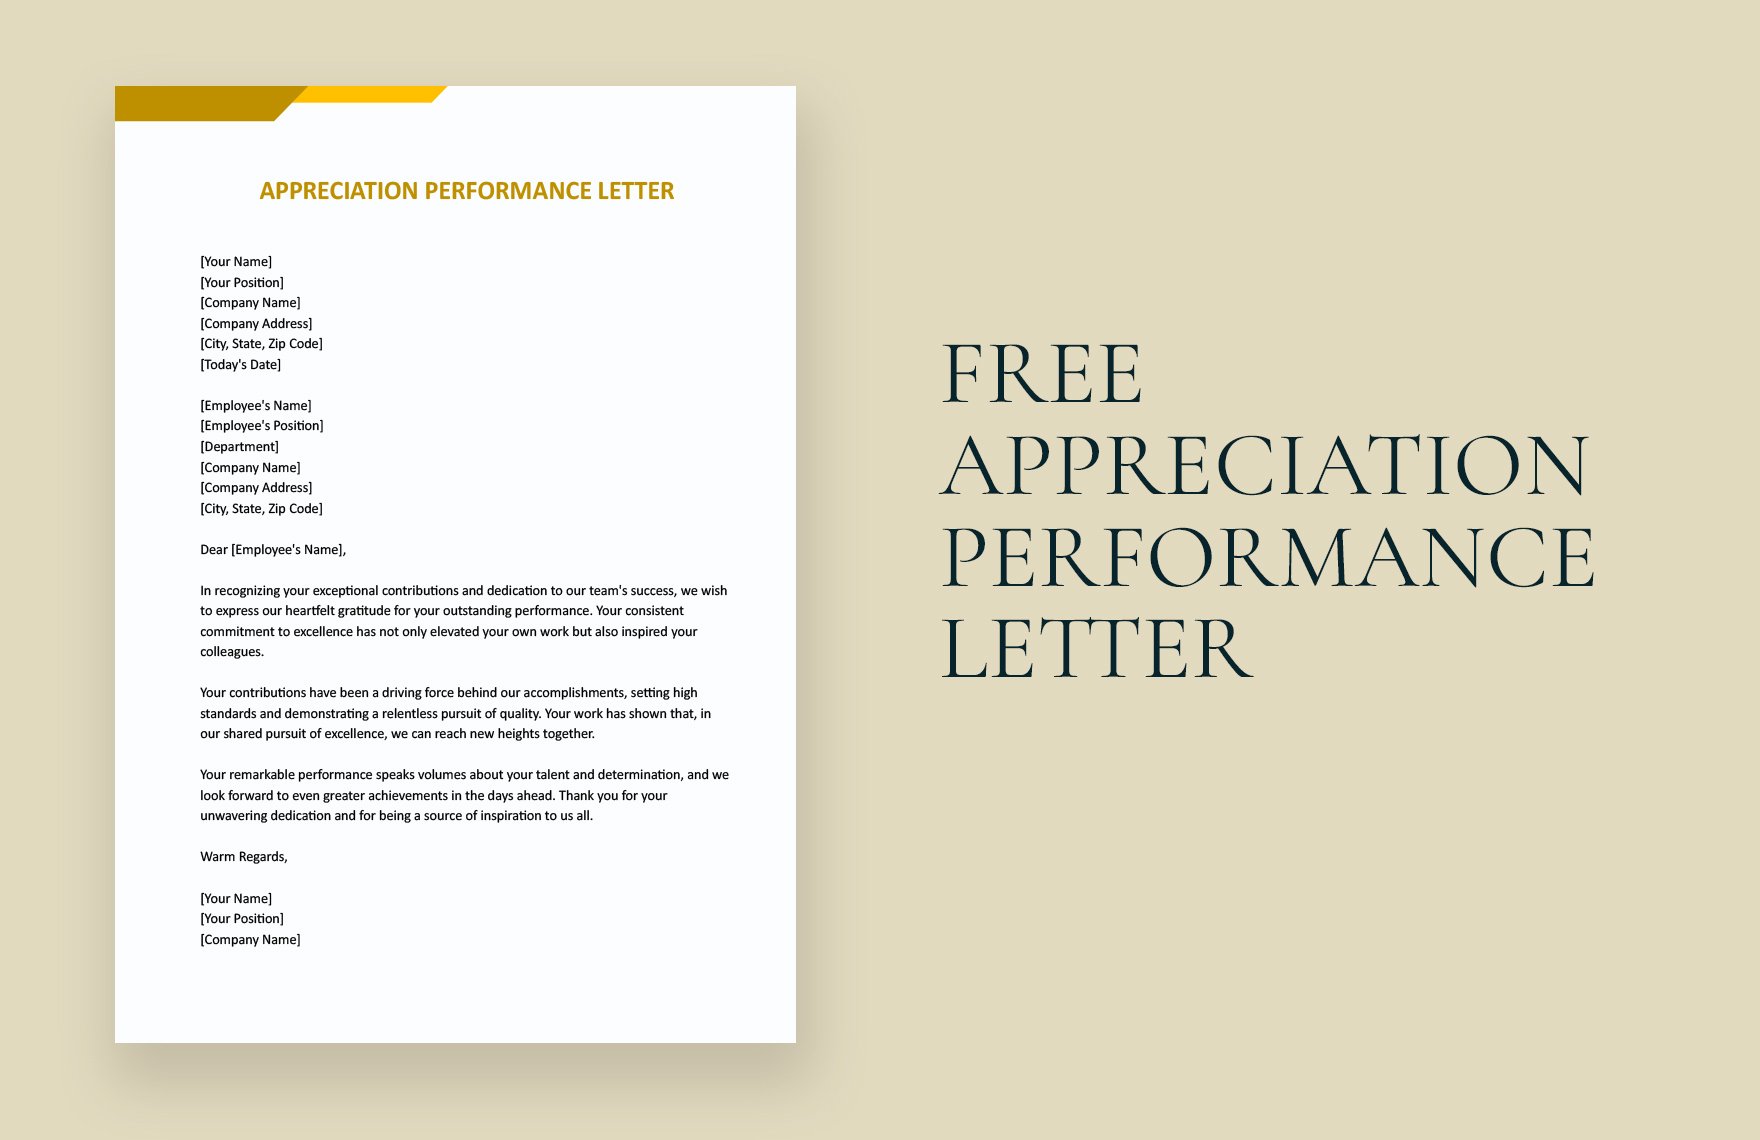 Appreciation Performance Letter in Word, Google Docs